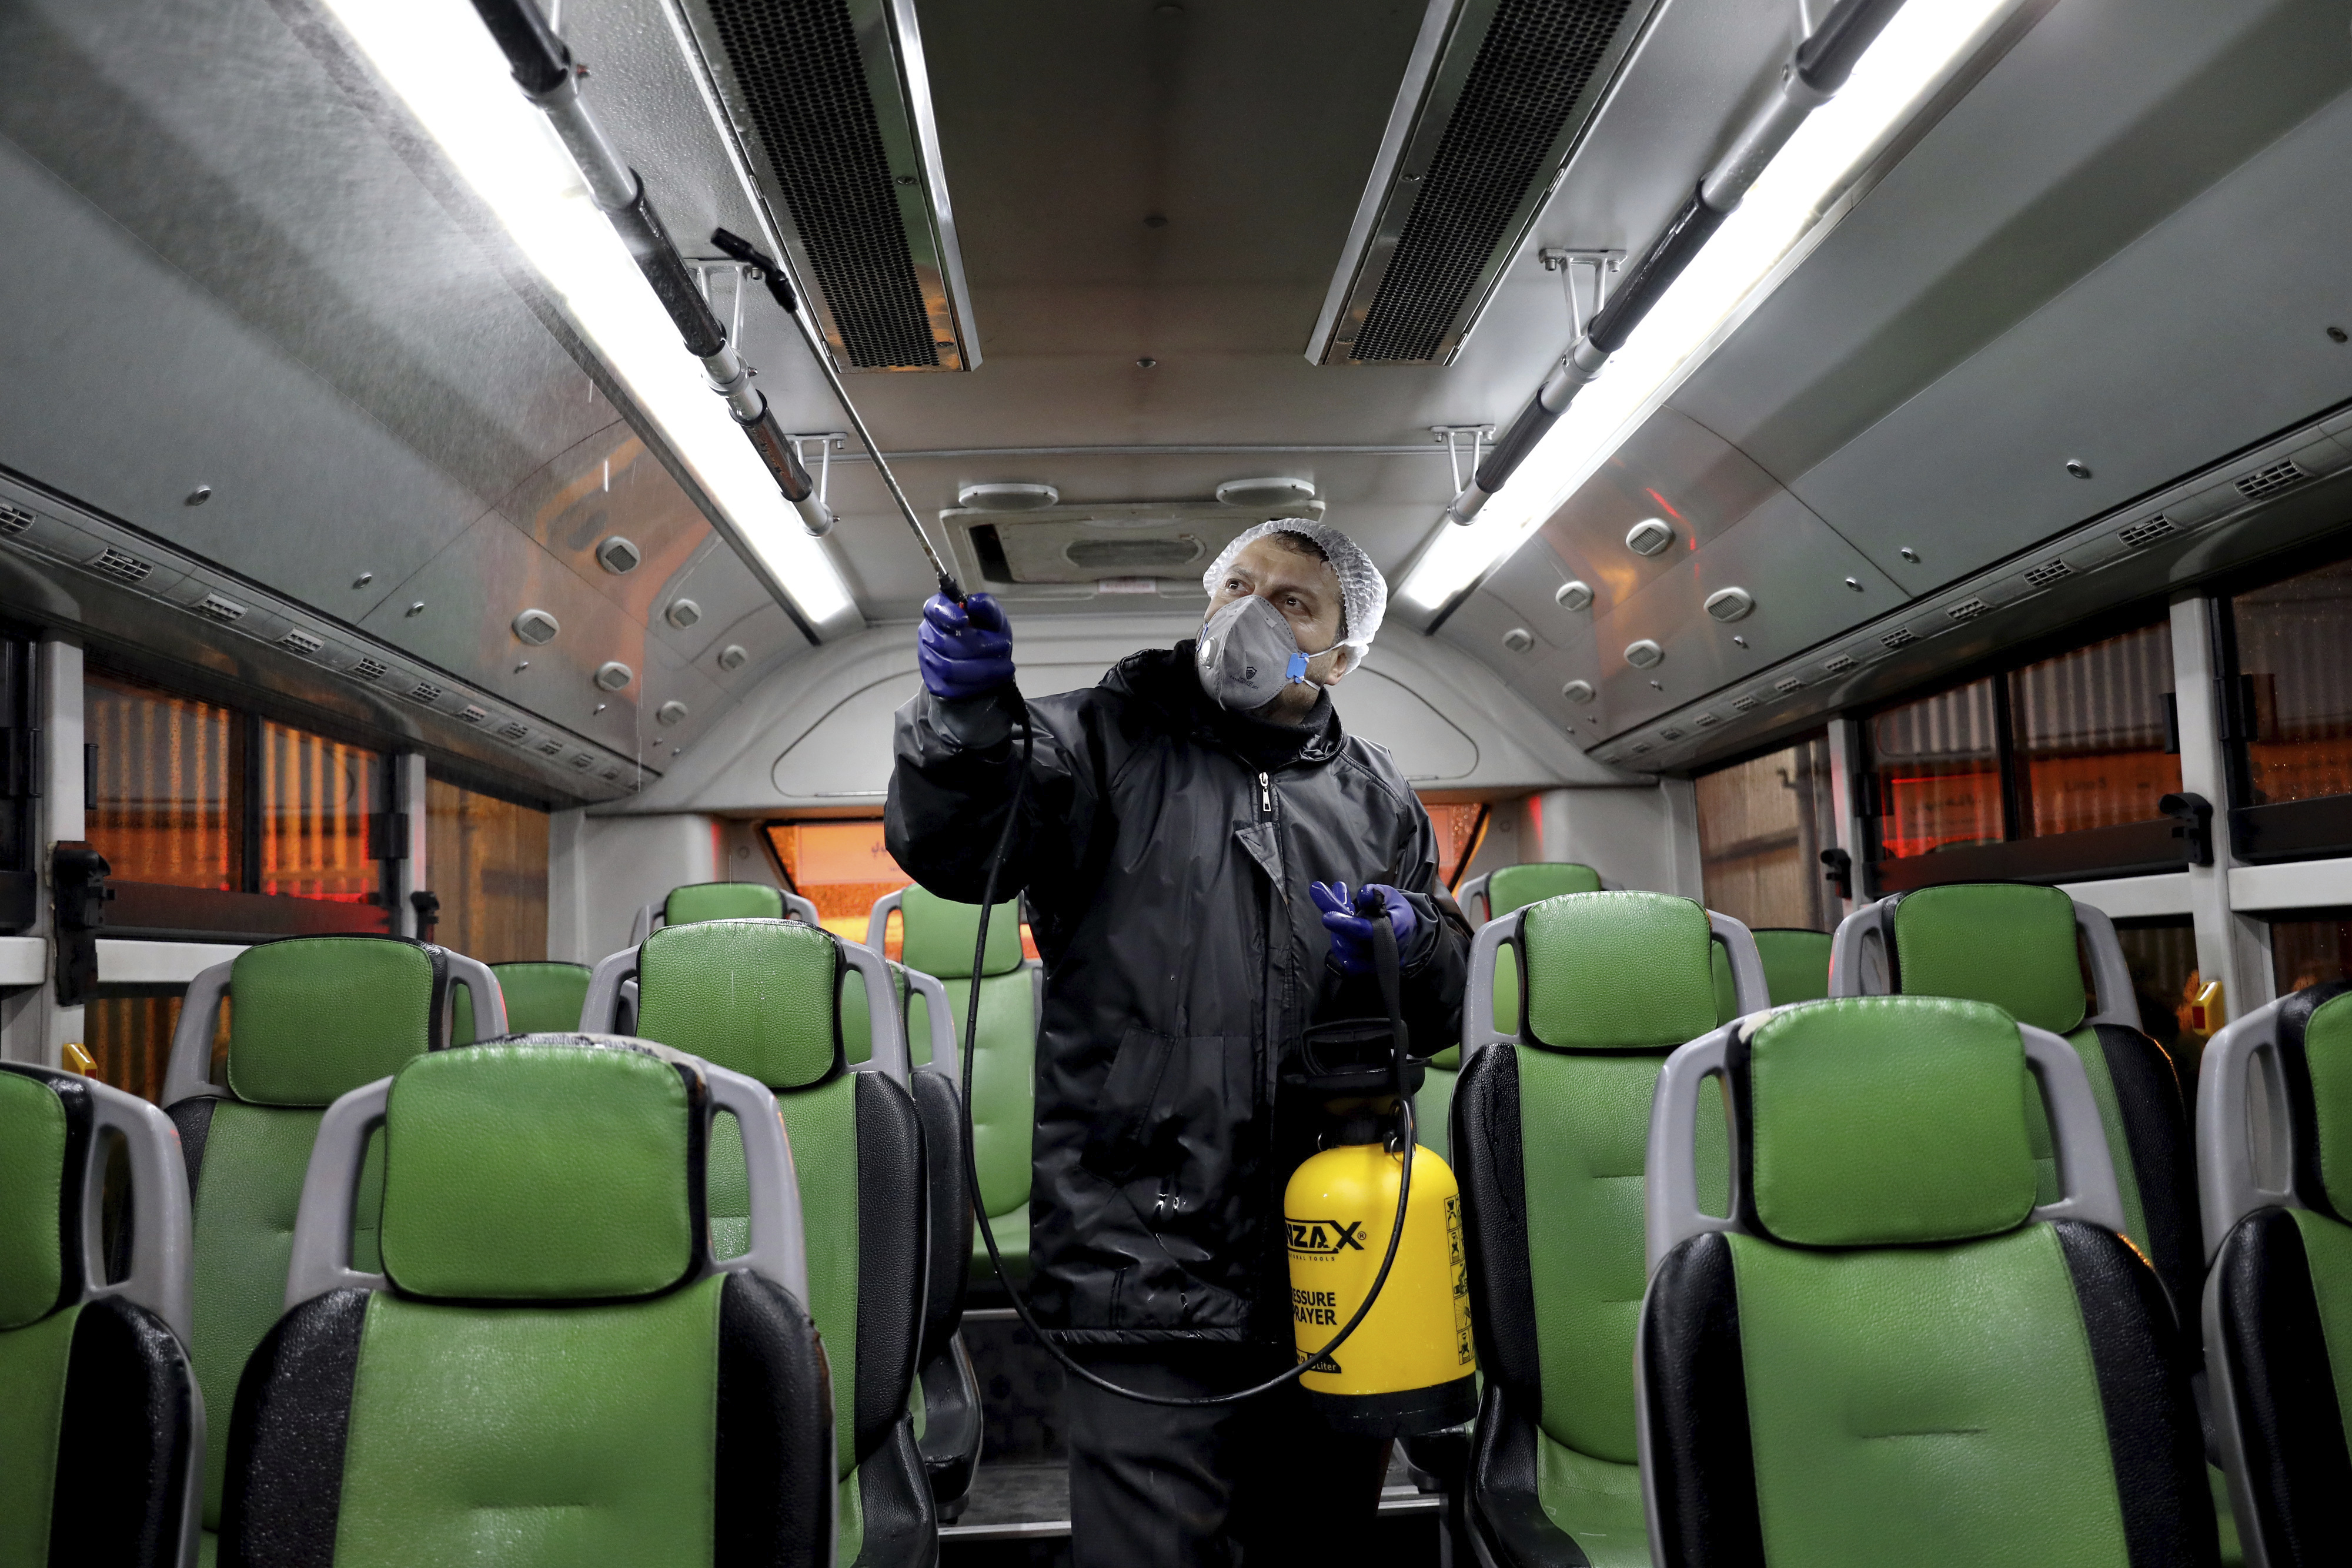 A worker disinfects a public bus against coronavirus in Tehran, Iran, early on Wednesday, February 26.